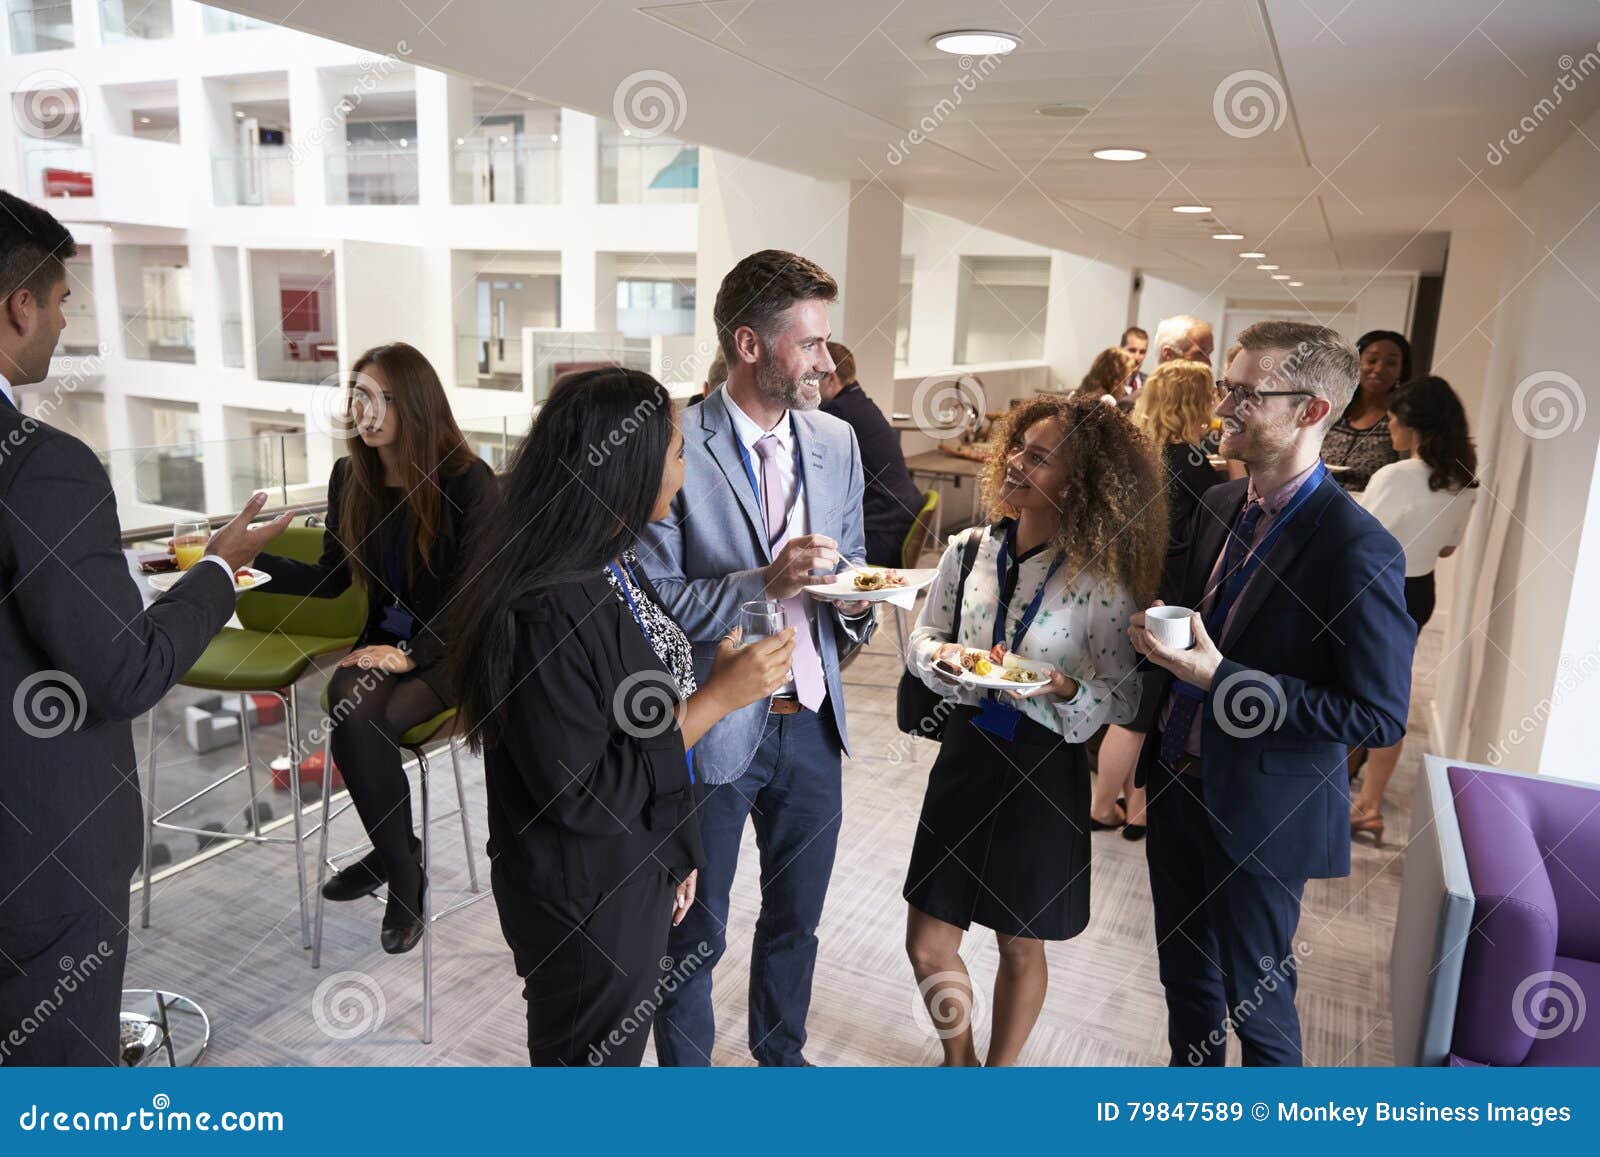 delegates networking during conference lunch break